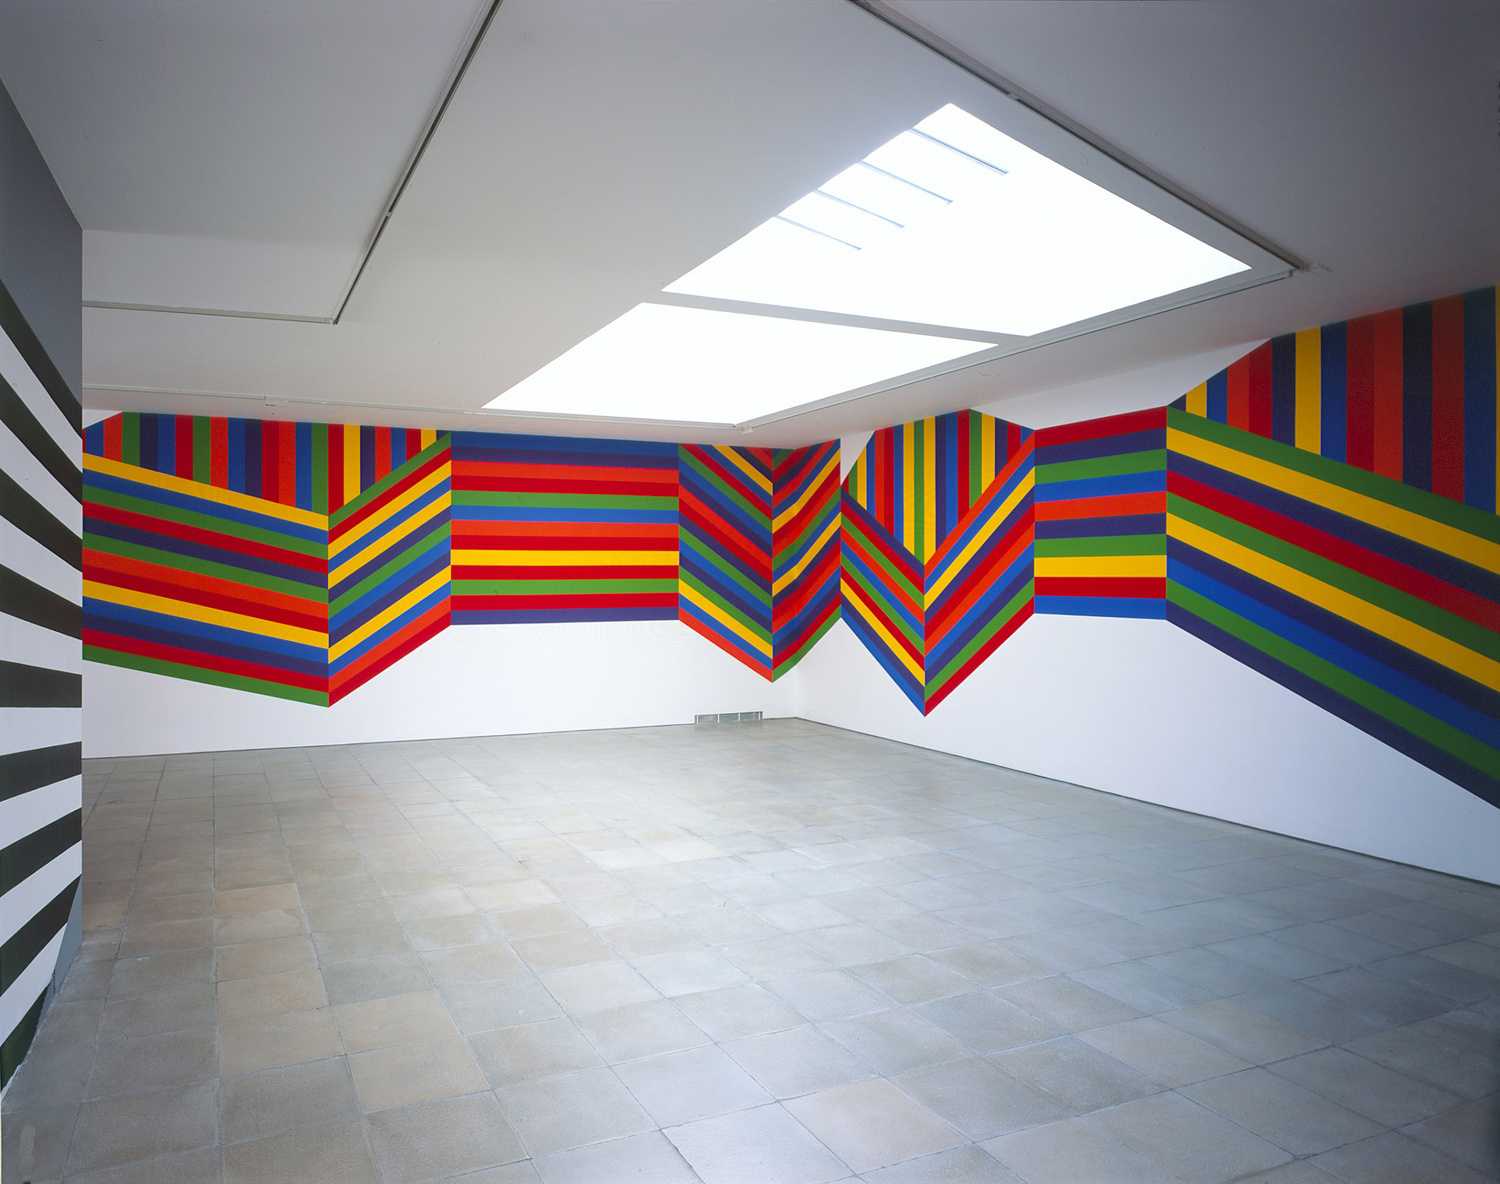 Sol LeWitt Wall Drawing #1138: Forms composed of bands of color, 2004 Acrylic paint Installation dimensions variable